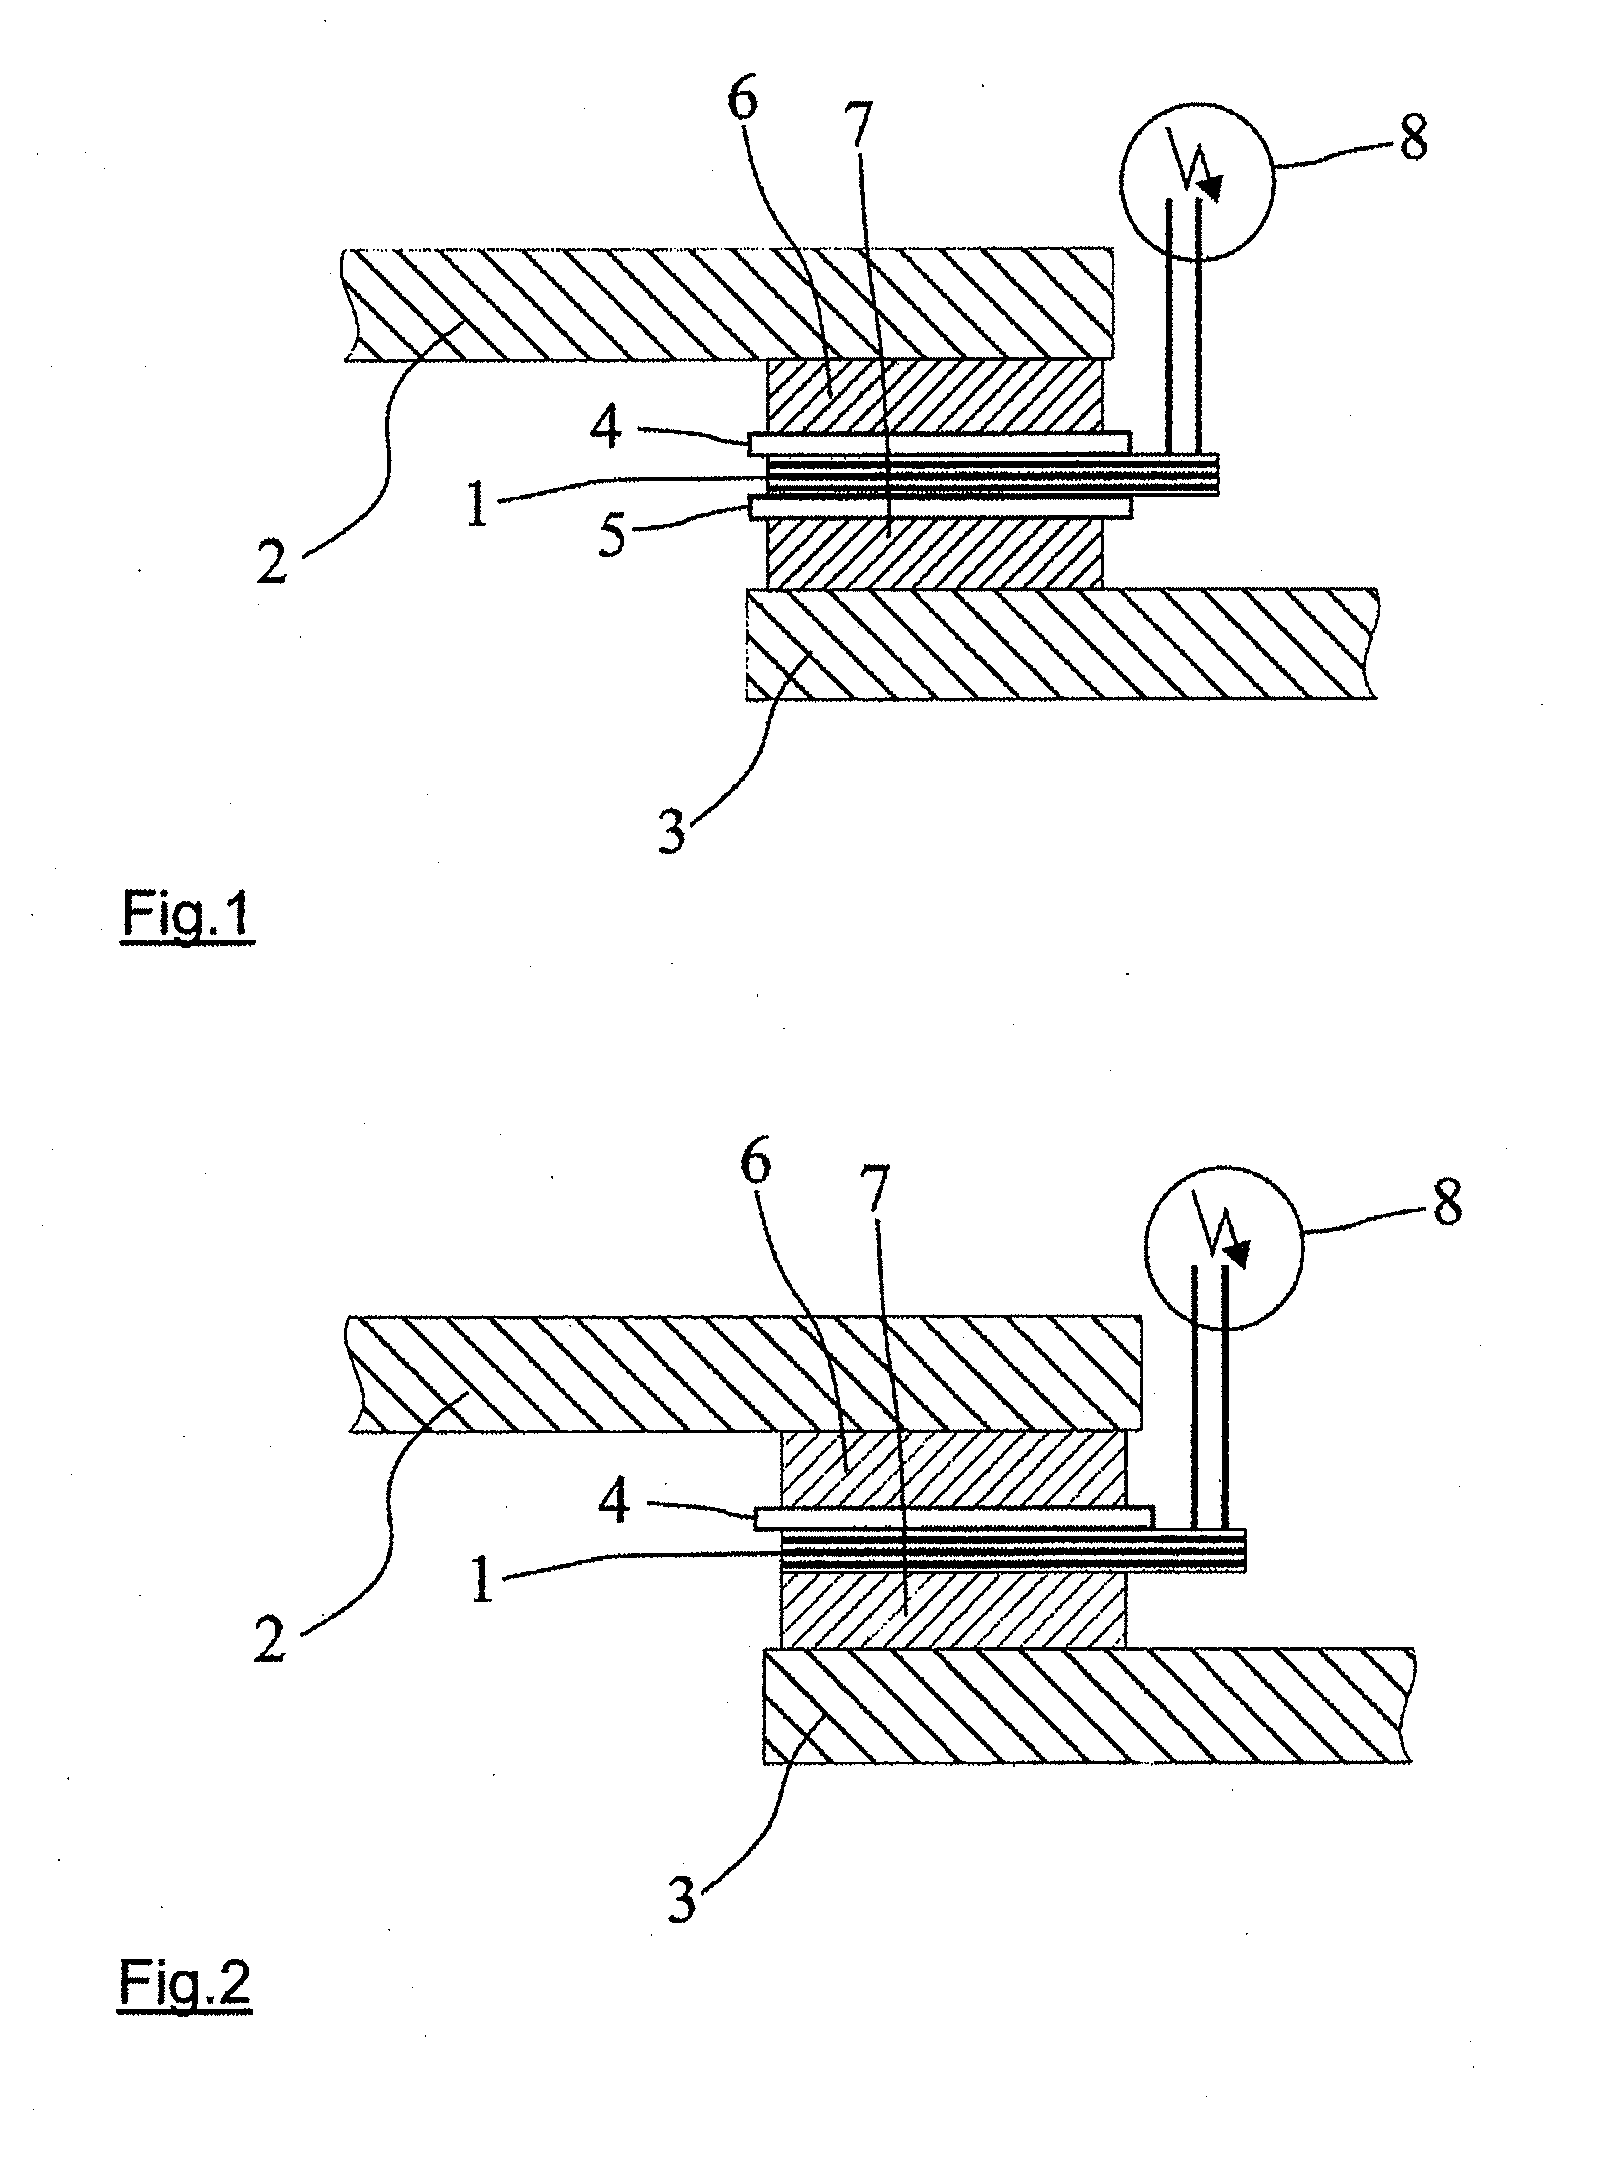 Electrical bypass element, in particular for storage cells of an energy storage device